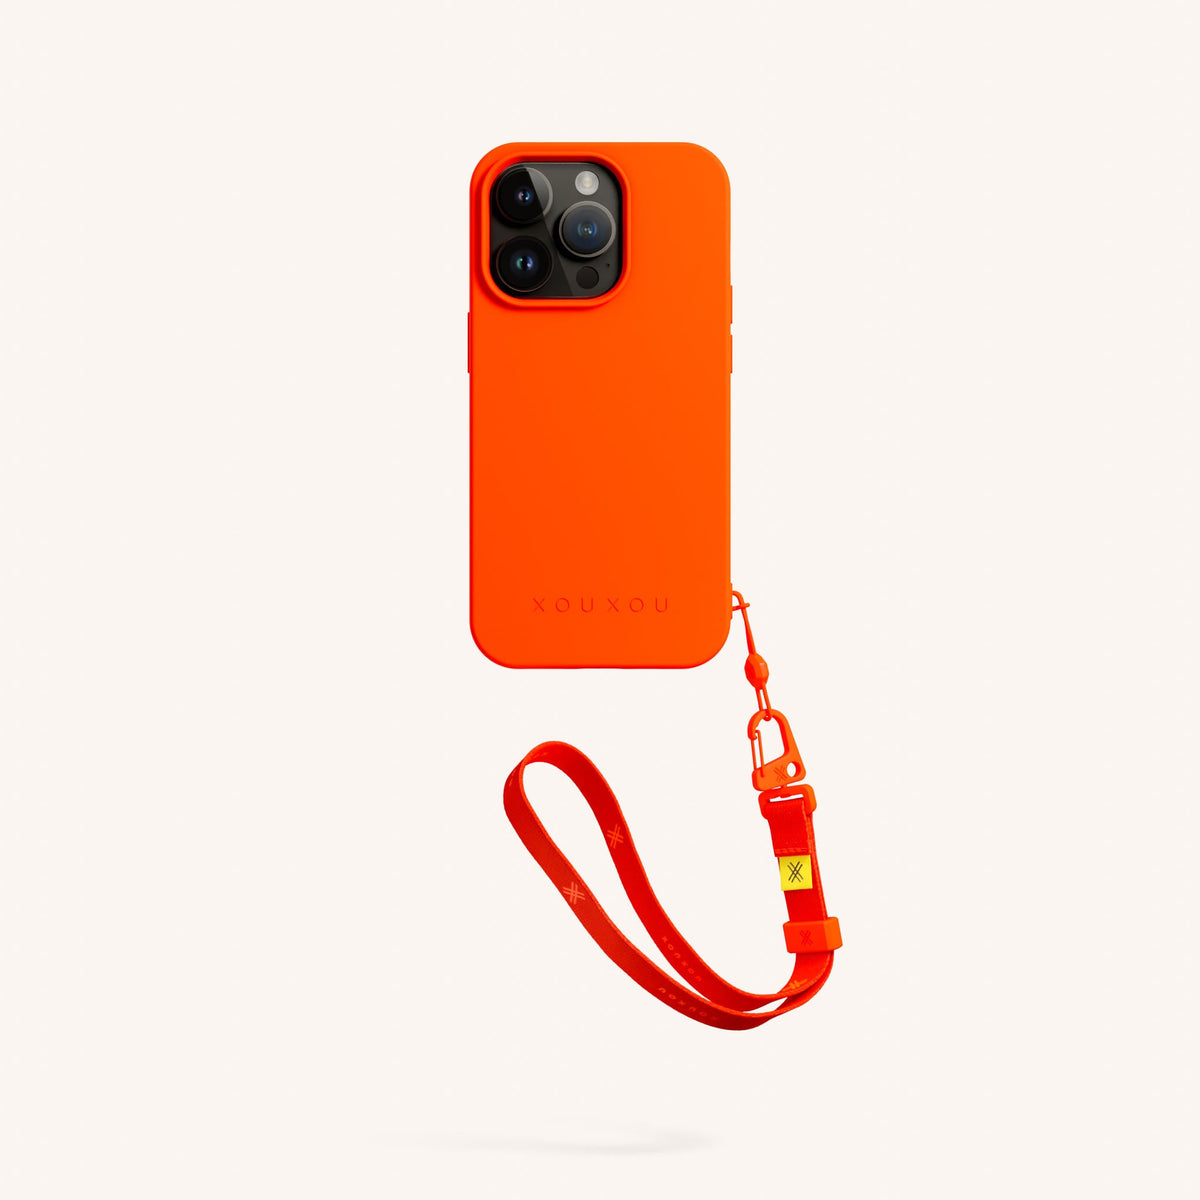 AnyCases  Luxury Phone Cases, Watch Bands, AirPods & Bags